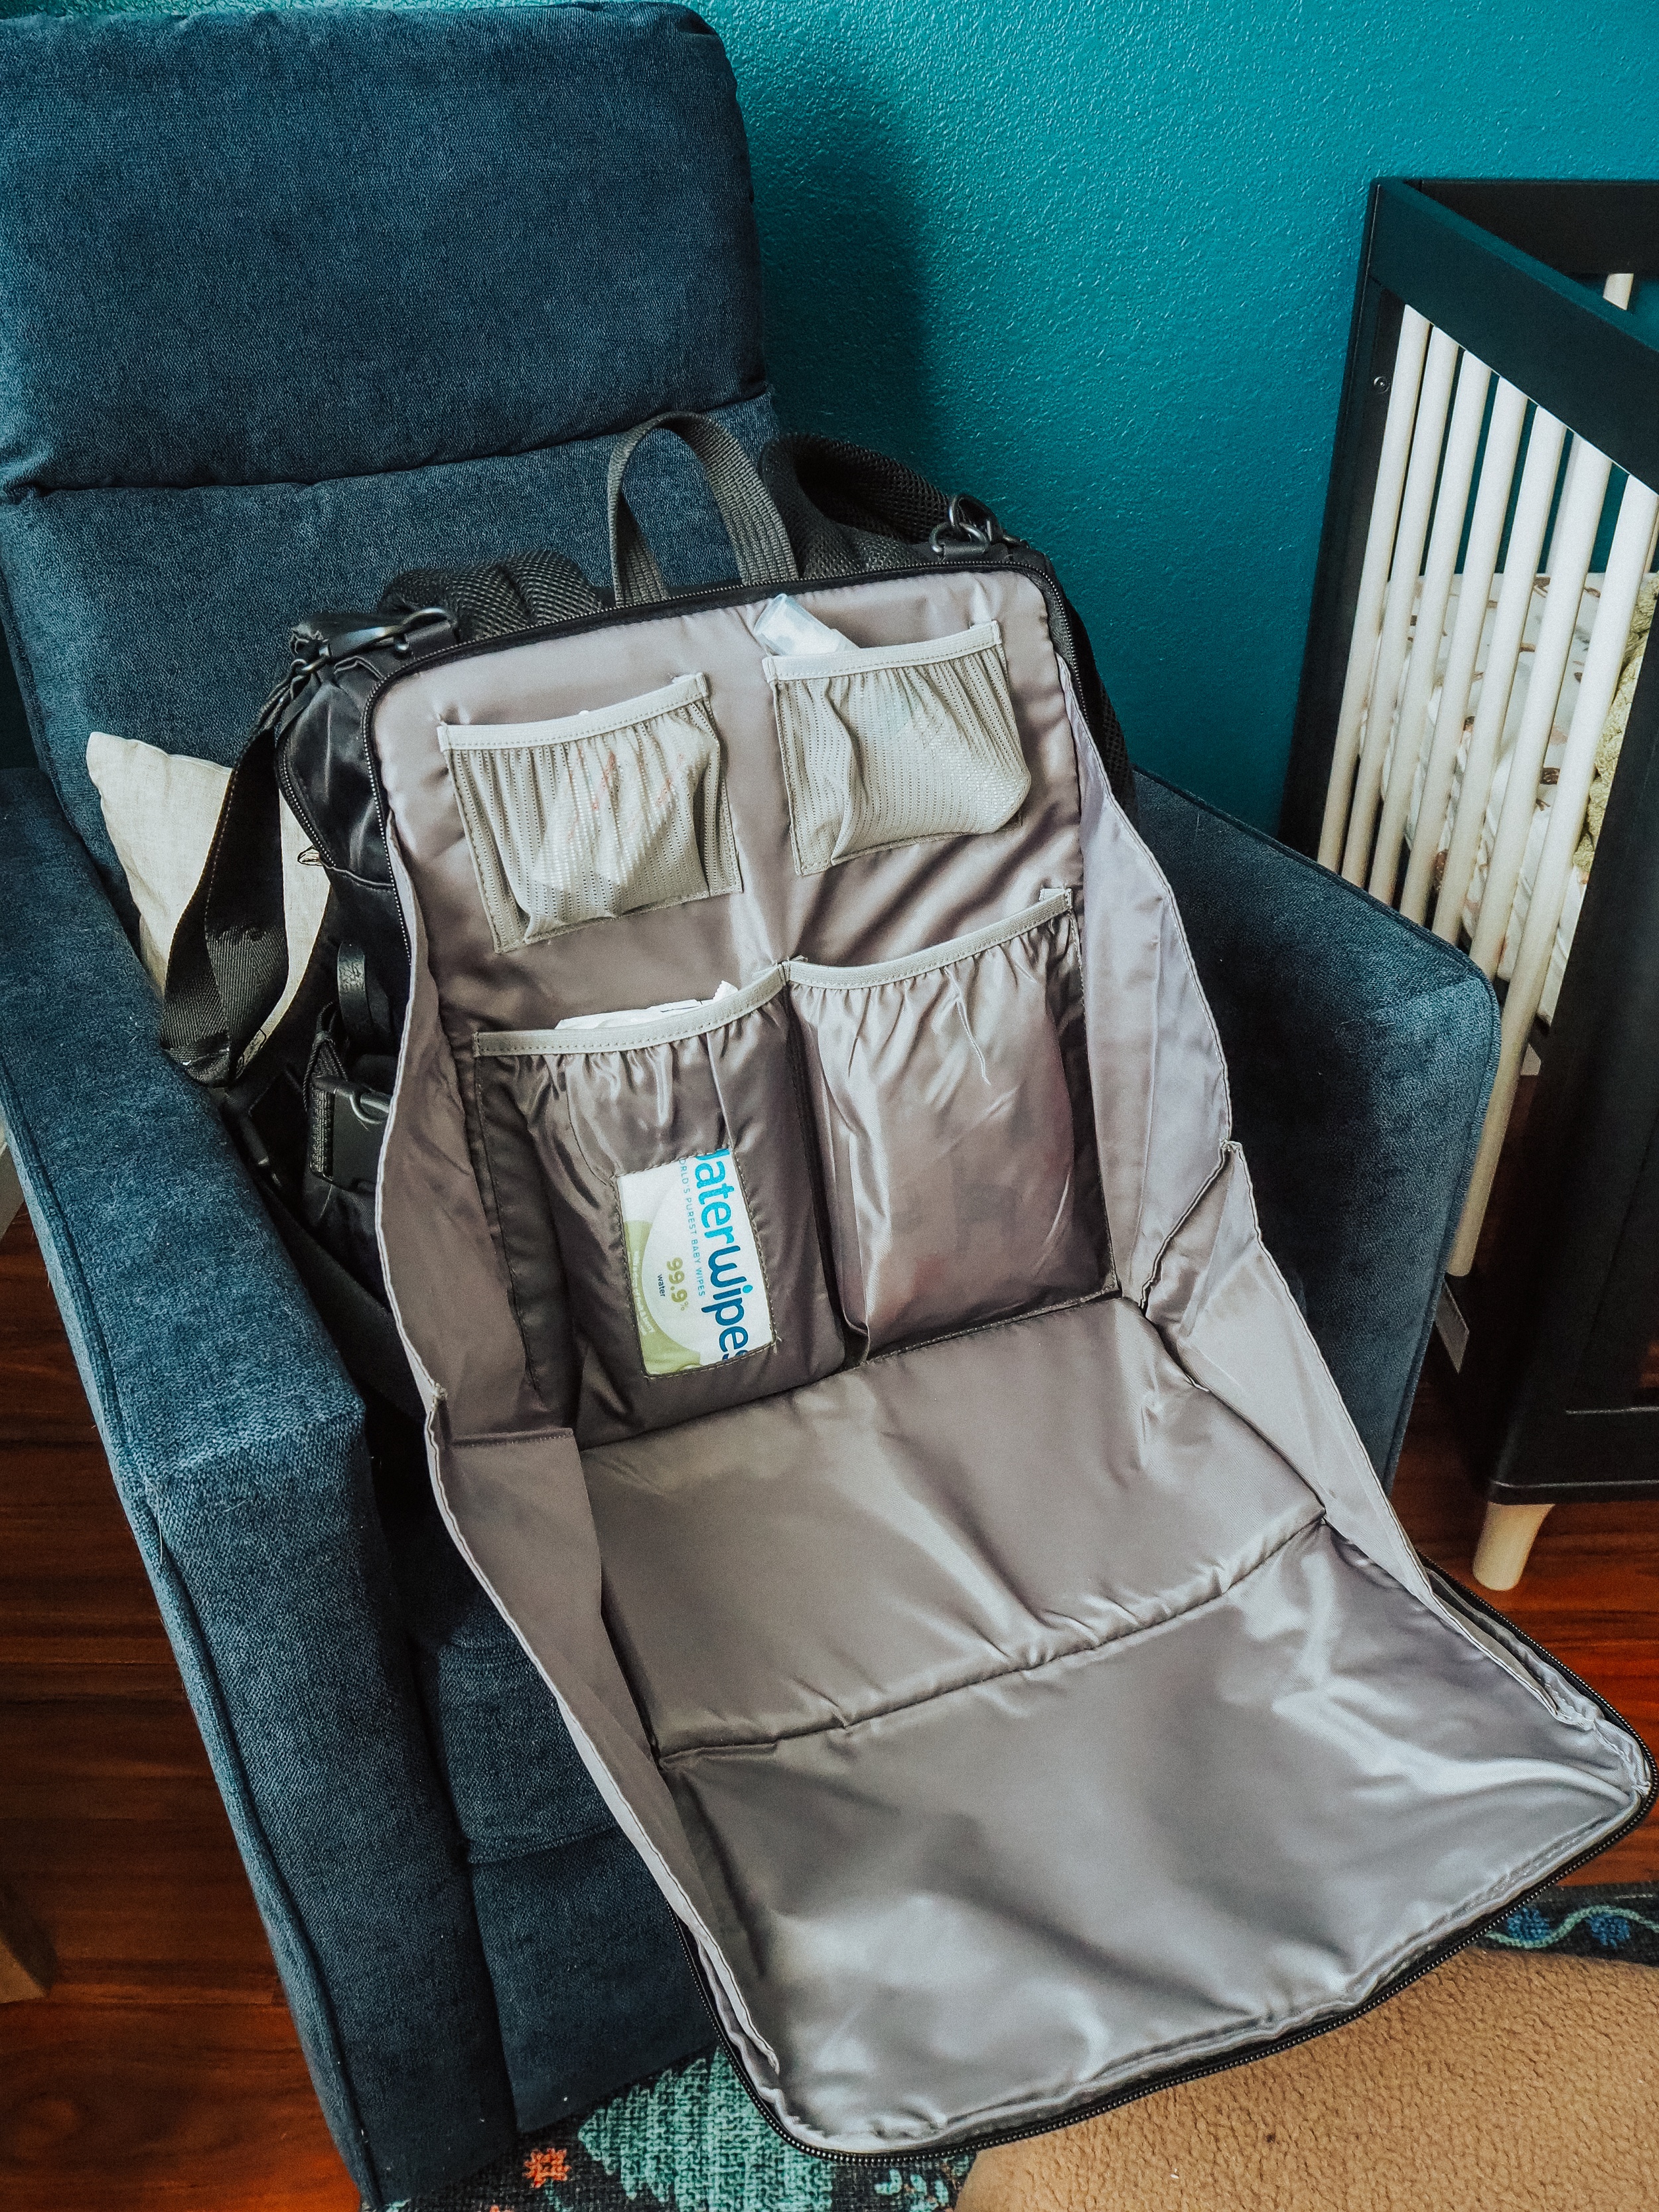 One of the first items I registered for was our Beis Diaper Bag. Or more specifically, our Beis Ultimate Diaper Backpack. 